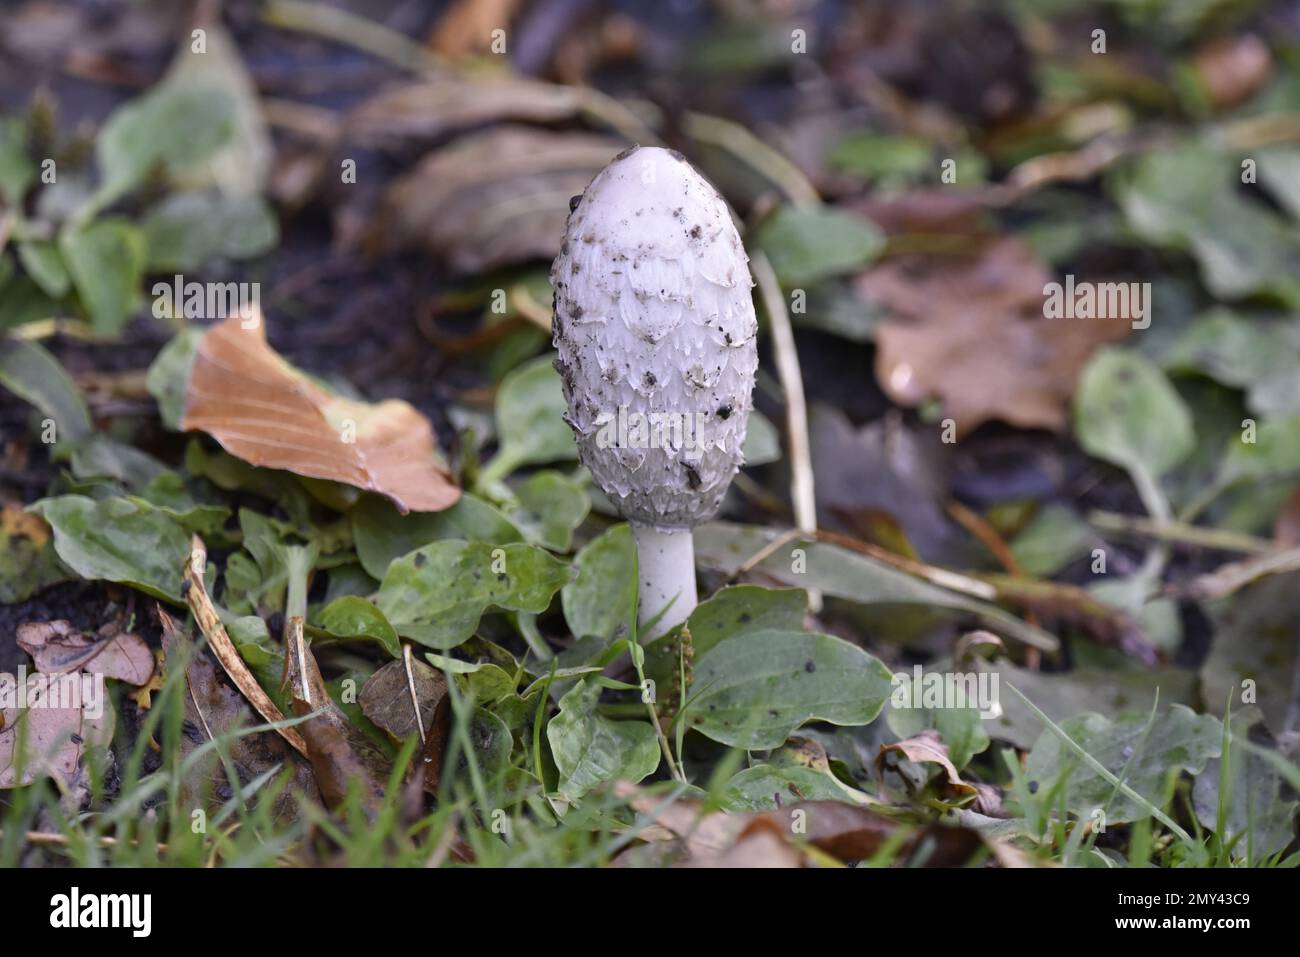 Close-Up Image of a Single Shaggy Inkcap (Coprinus comatus) on the Ground Surrounded by Leaf Litter, Taken in October in Wales, UK Stock Photo